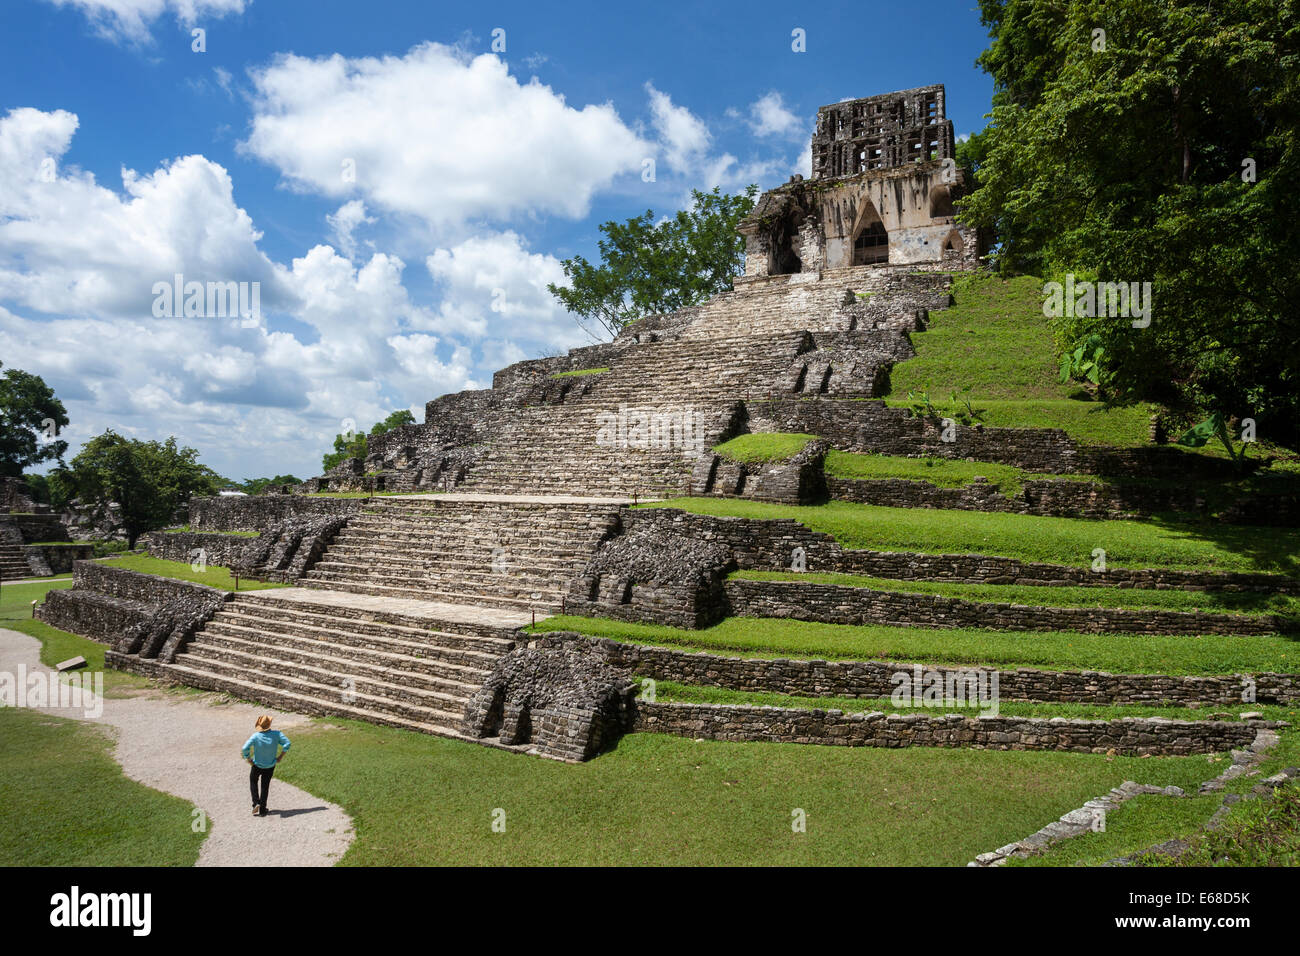 Steps lead up to the Temple of the Cross at the Mayan ruins of Palenque, Chiapas, Mexico. Stock Photo